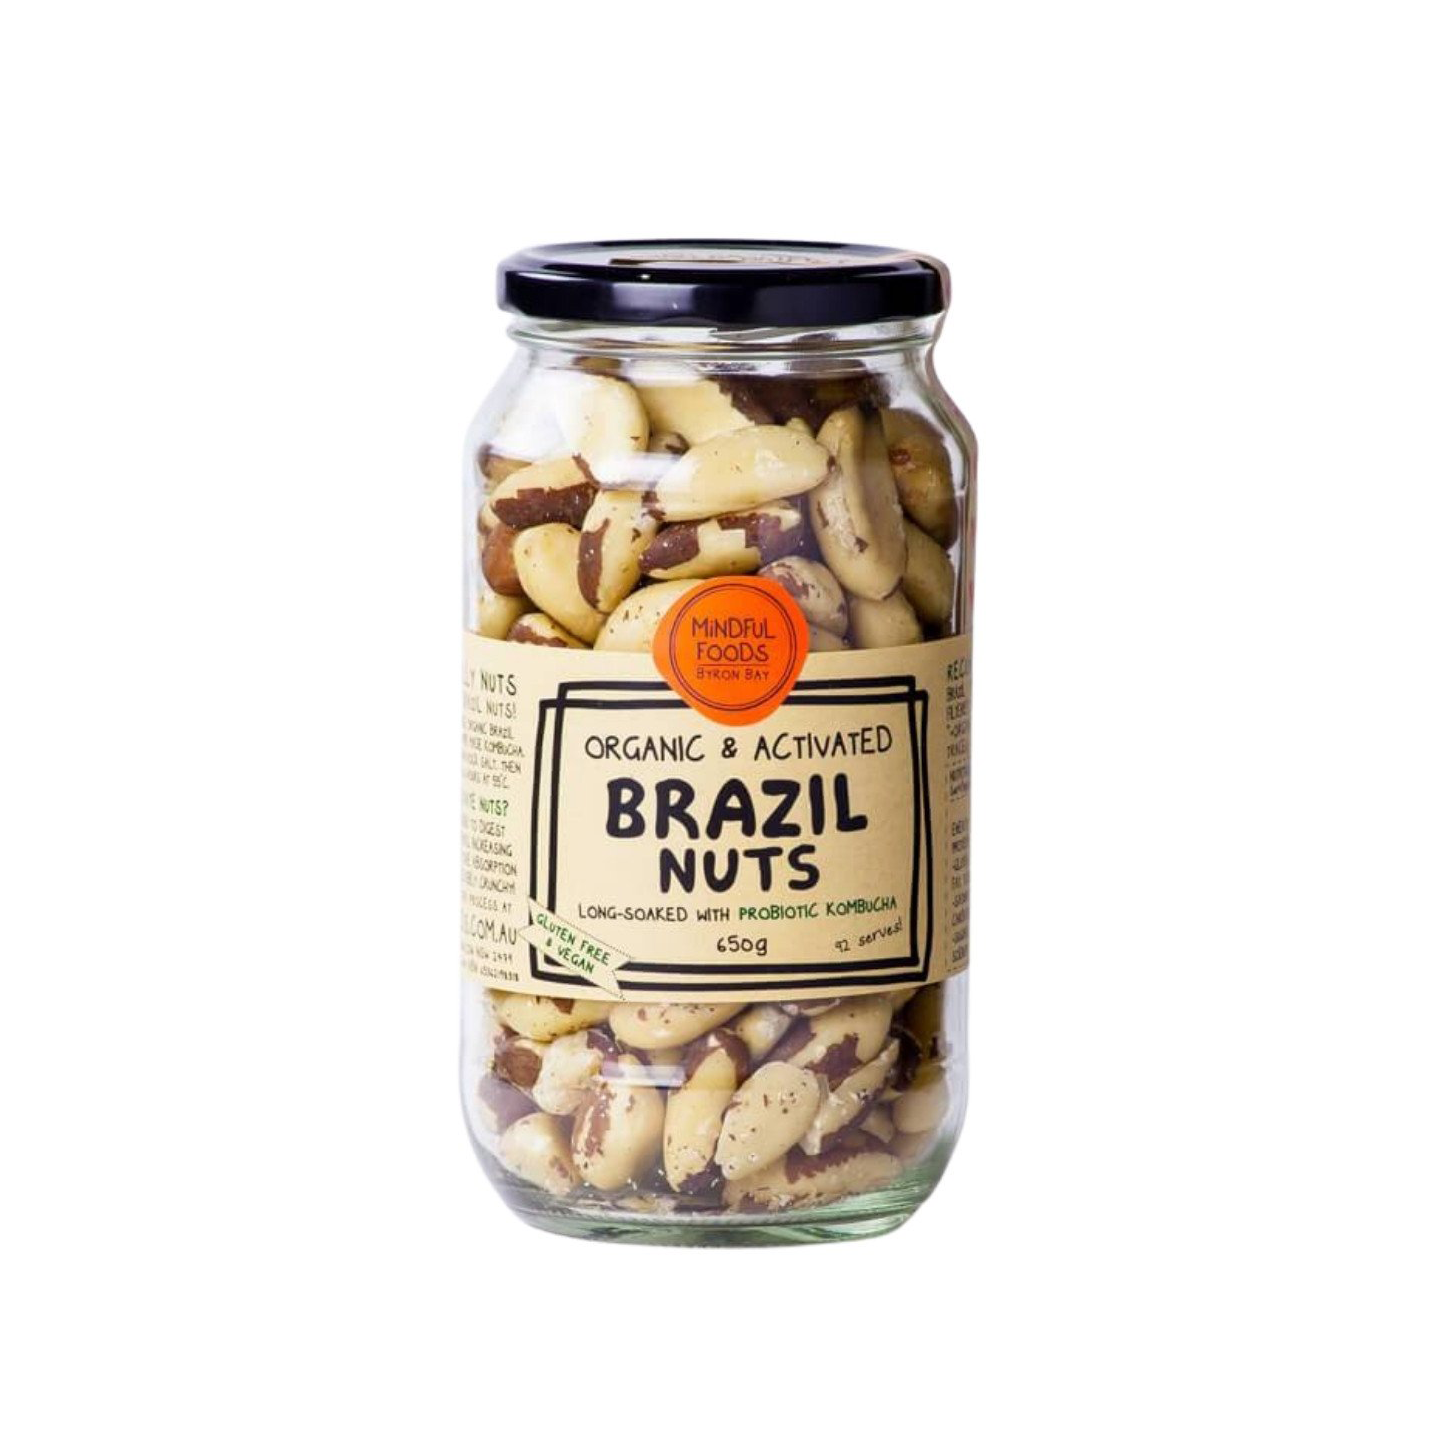 Mindful Foods Brazil Nuts 325g, 650g Or 1kg (Organic & Activated)